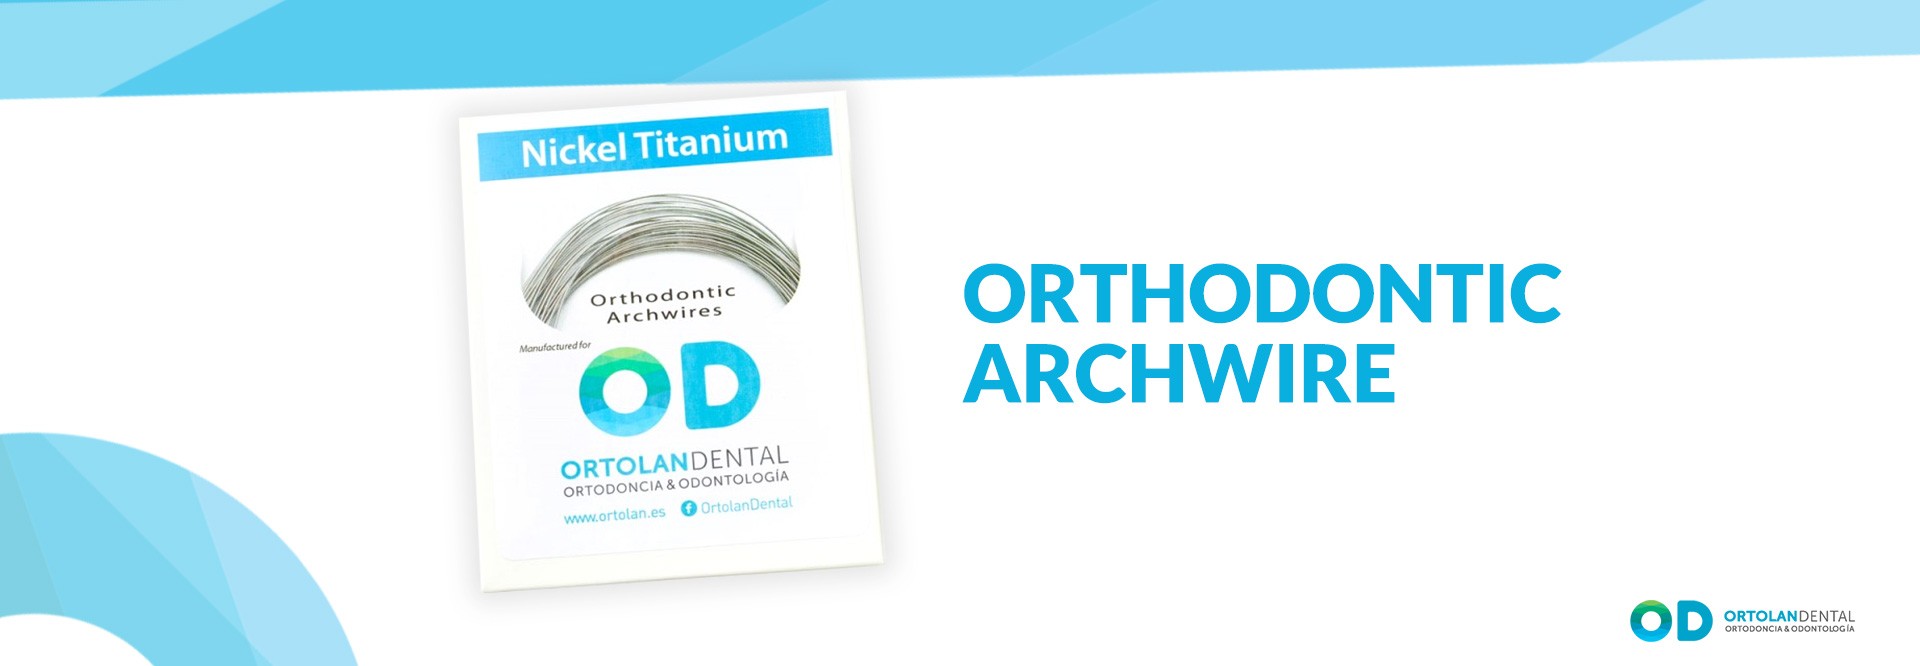 ORTHODONTIC ARCHWIRE